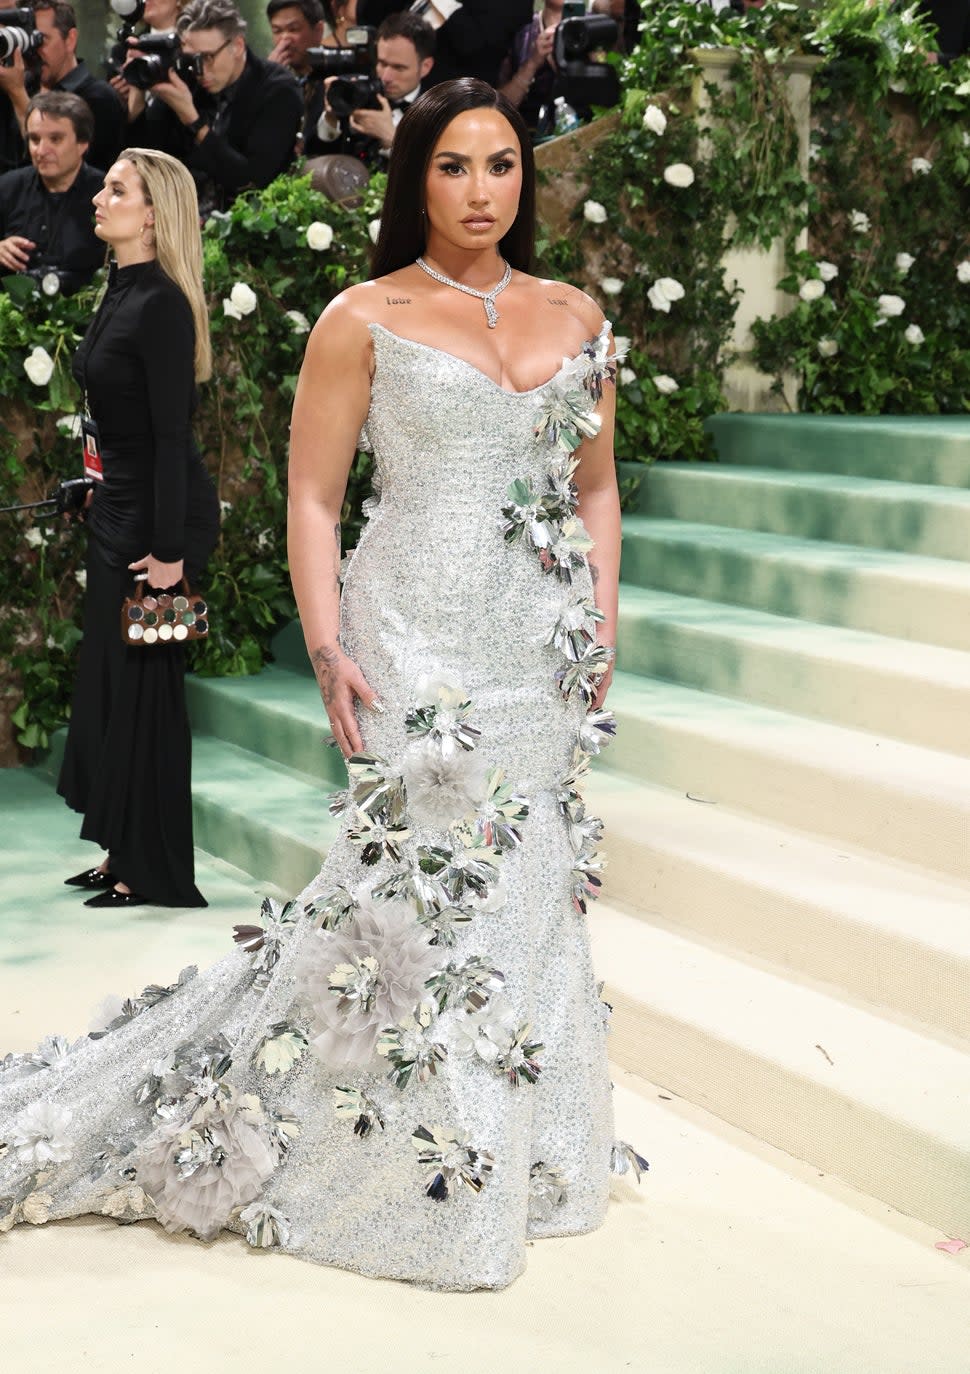 Demi Lovato returned to the Met Gala after an 8 year absence 